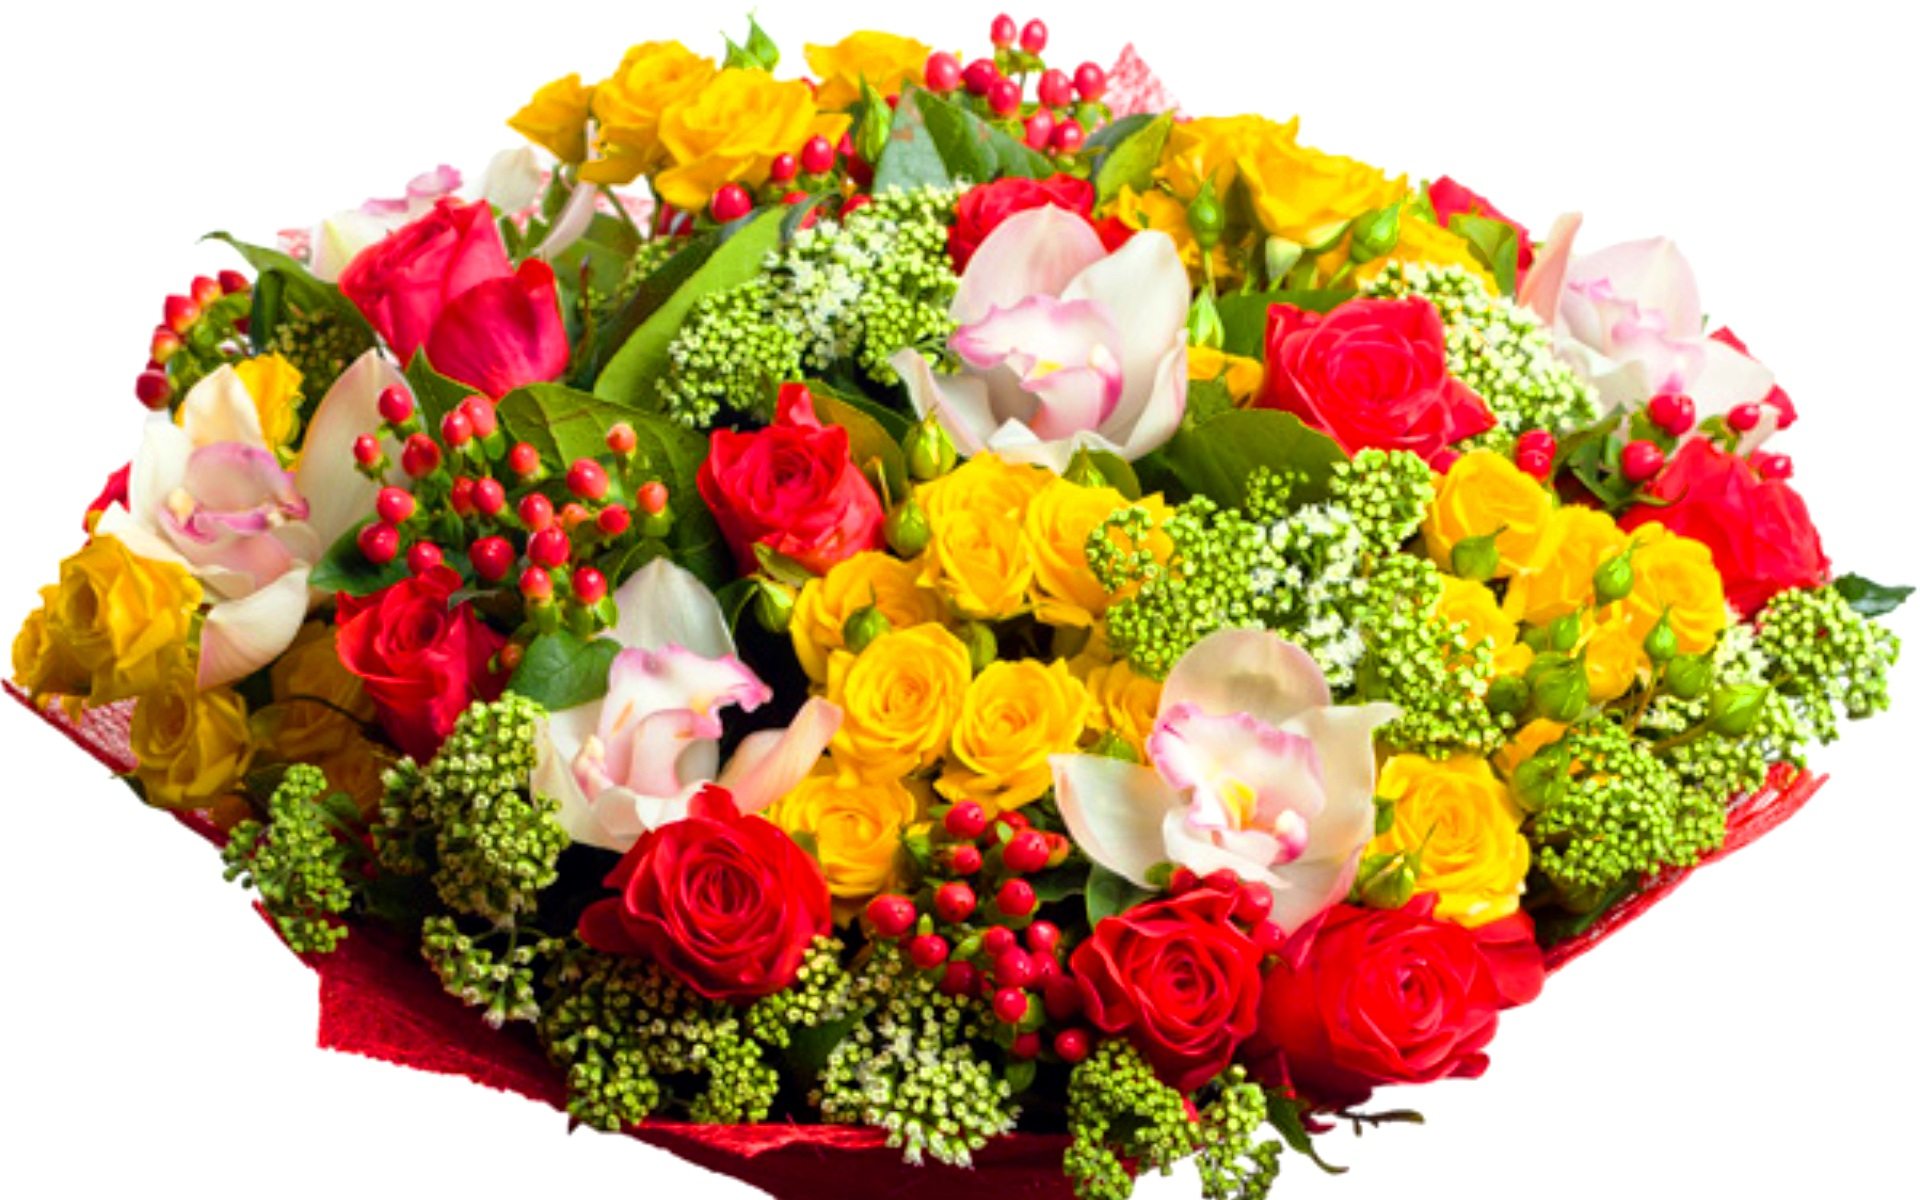 Delivery of flowers - is a sure way to please a loved one!